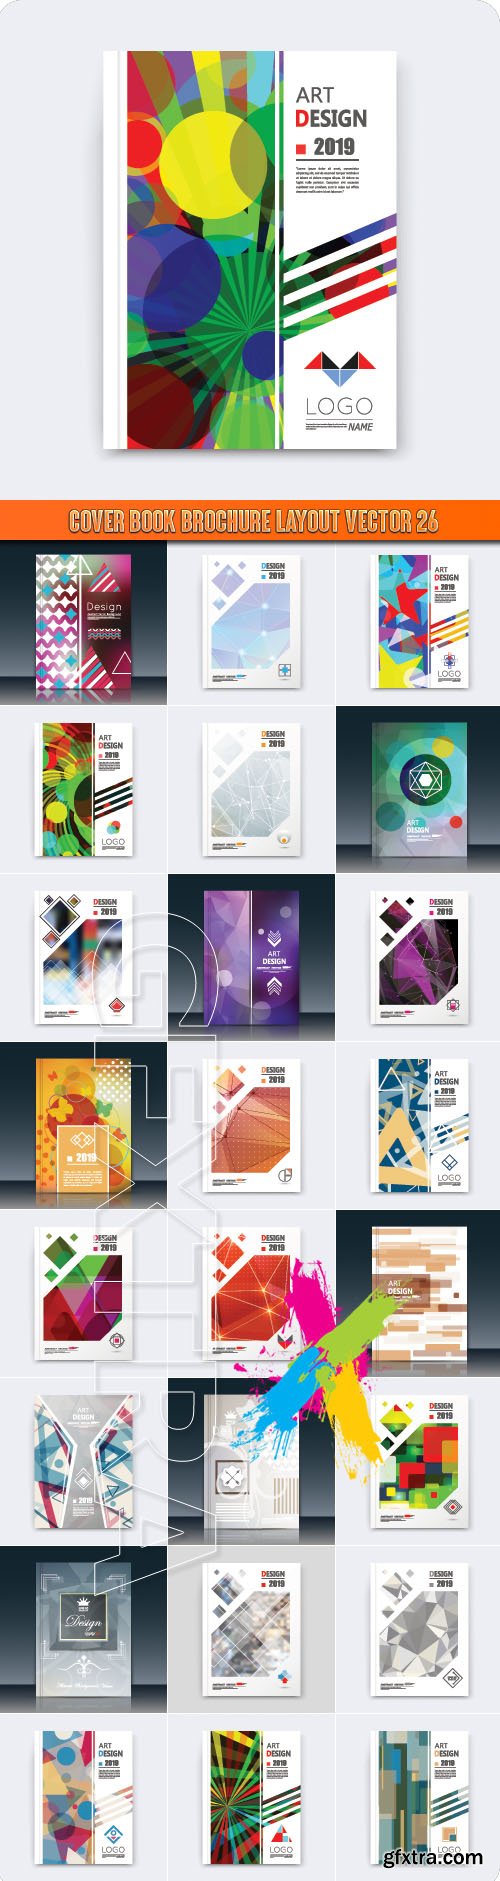 Cover book brochure layout vector 26